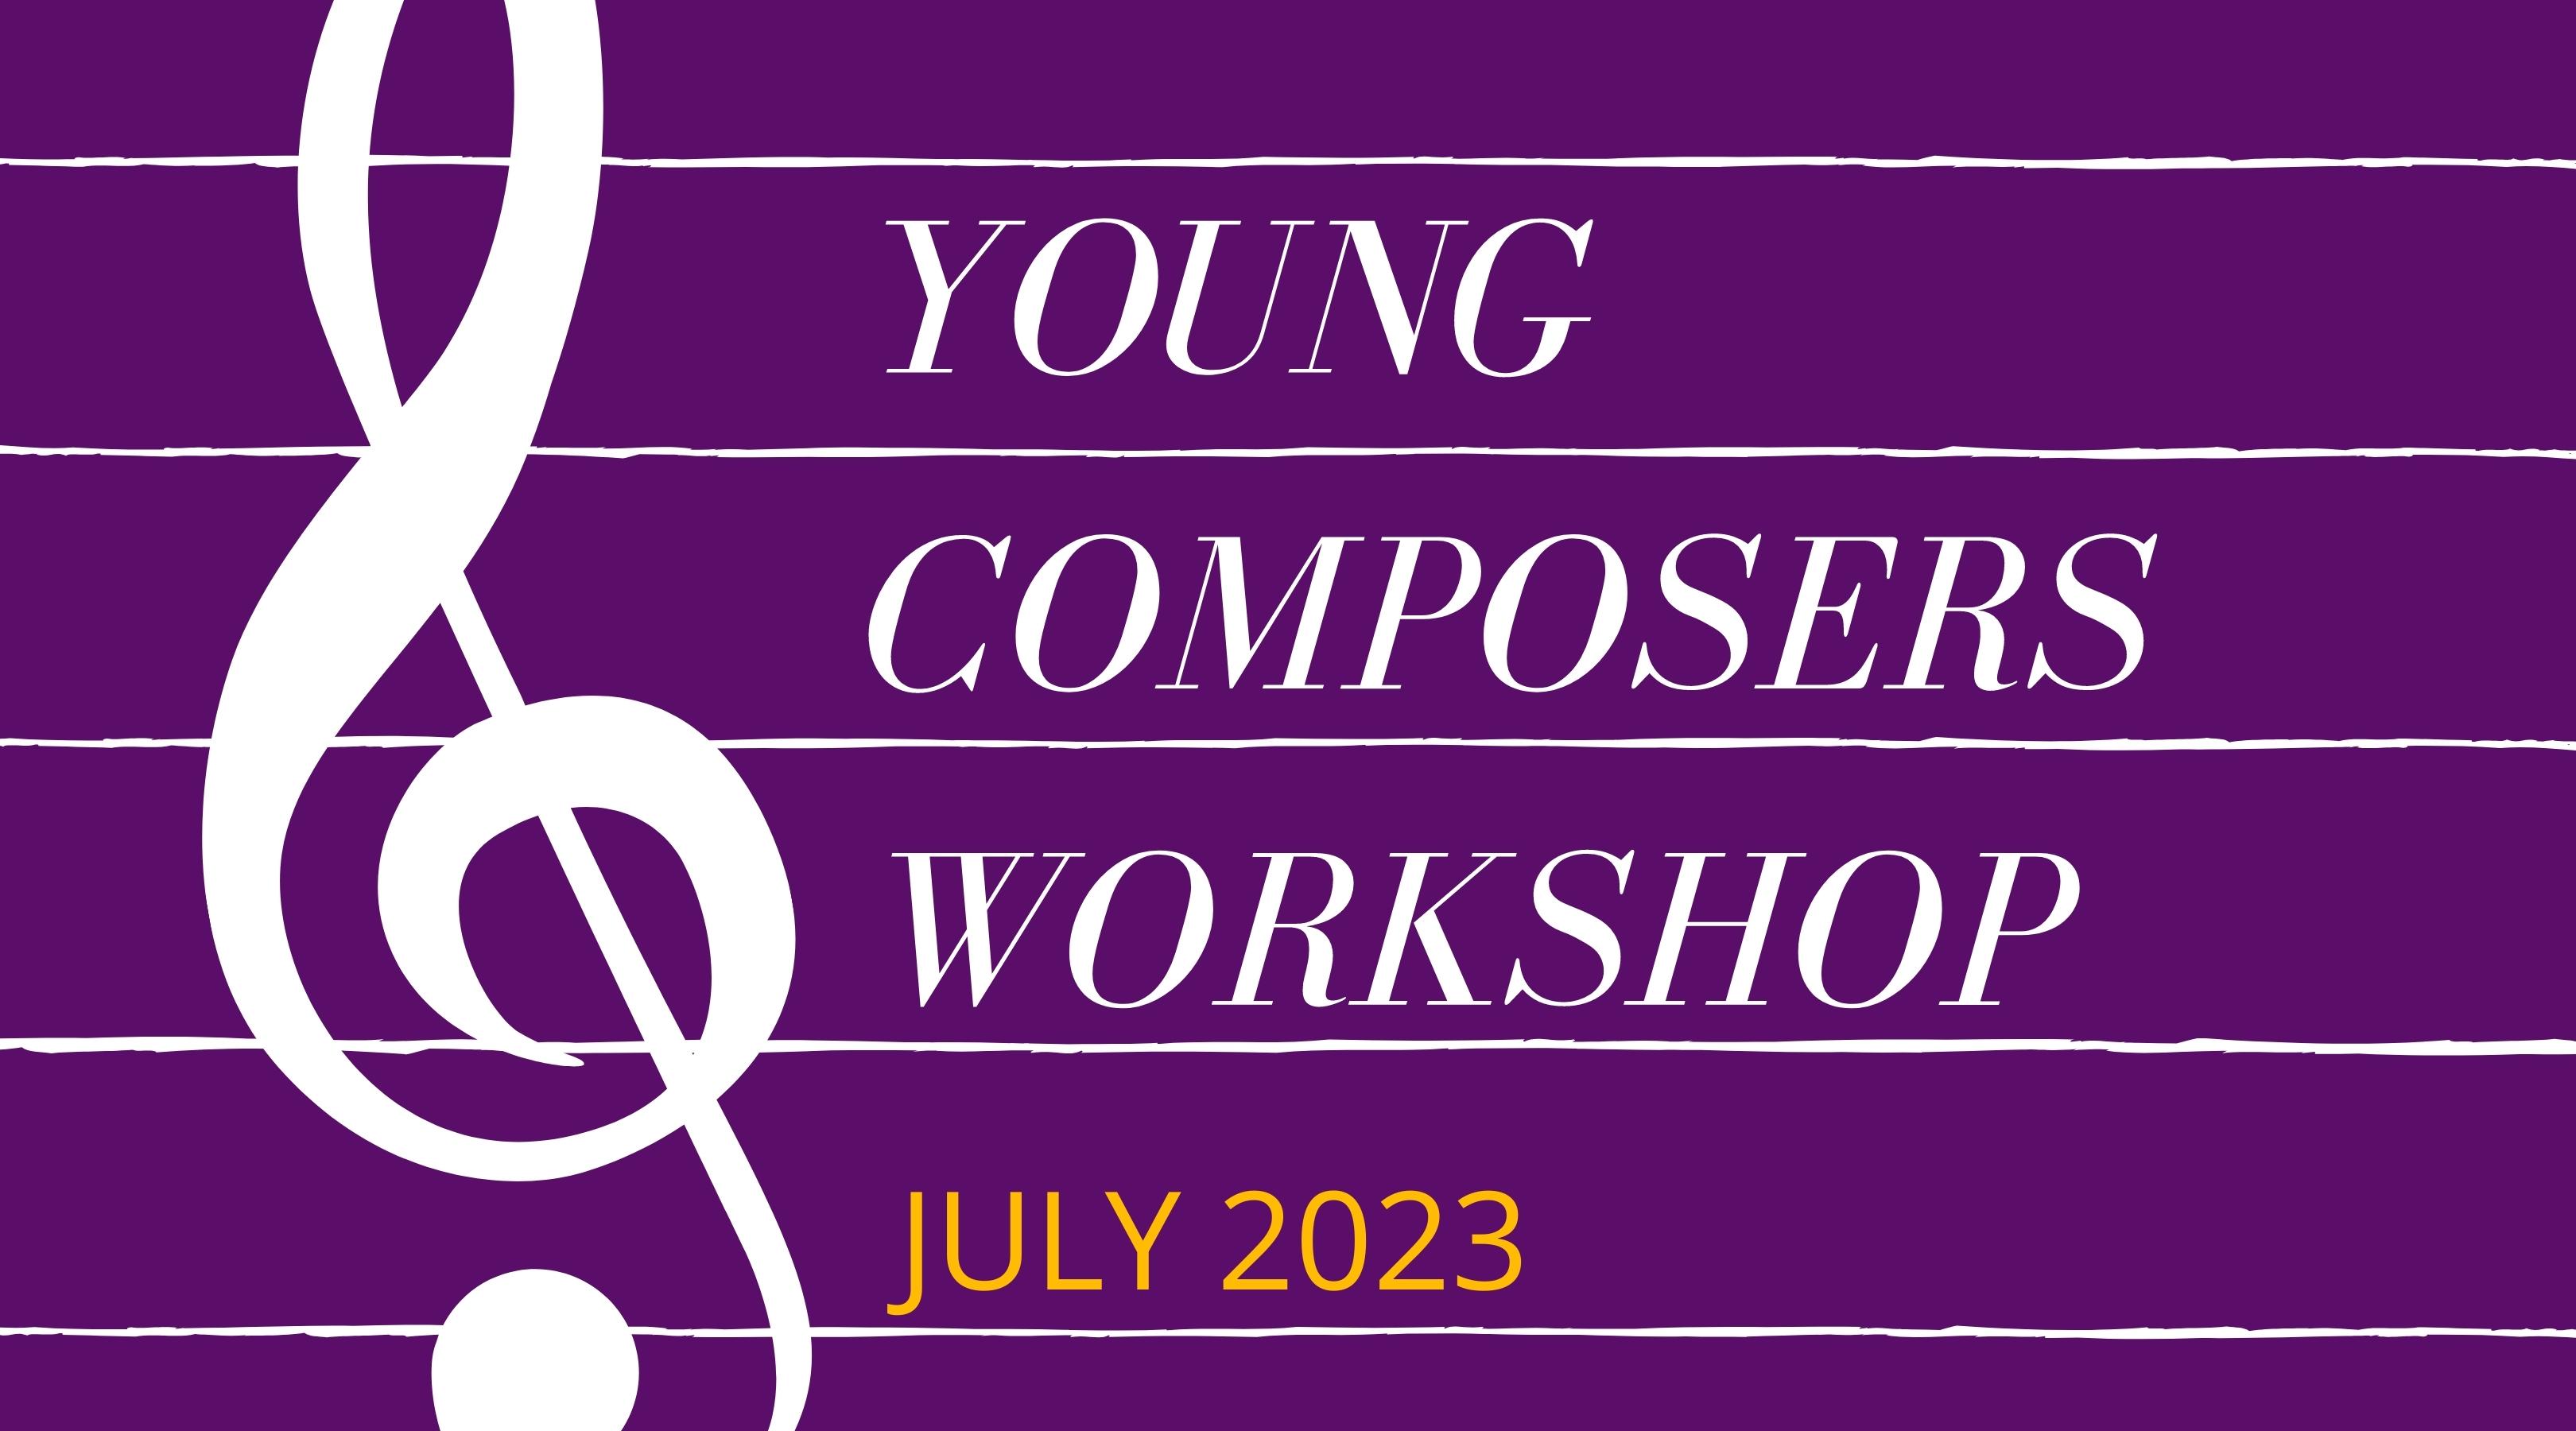 Young Composers Workshop July 2023